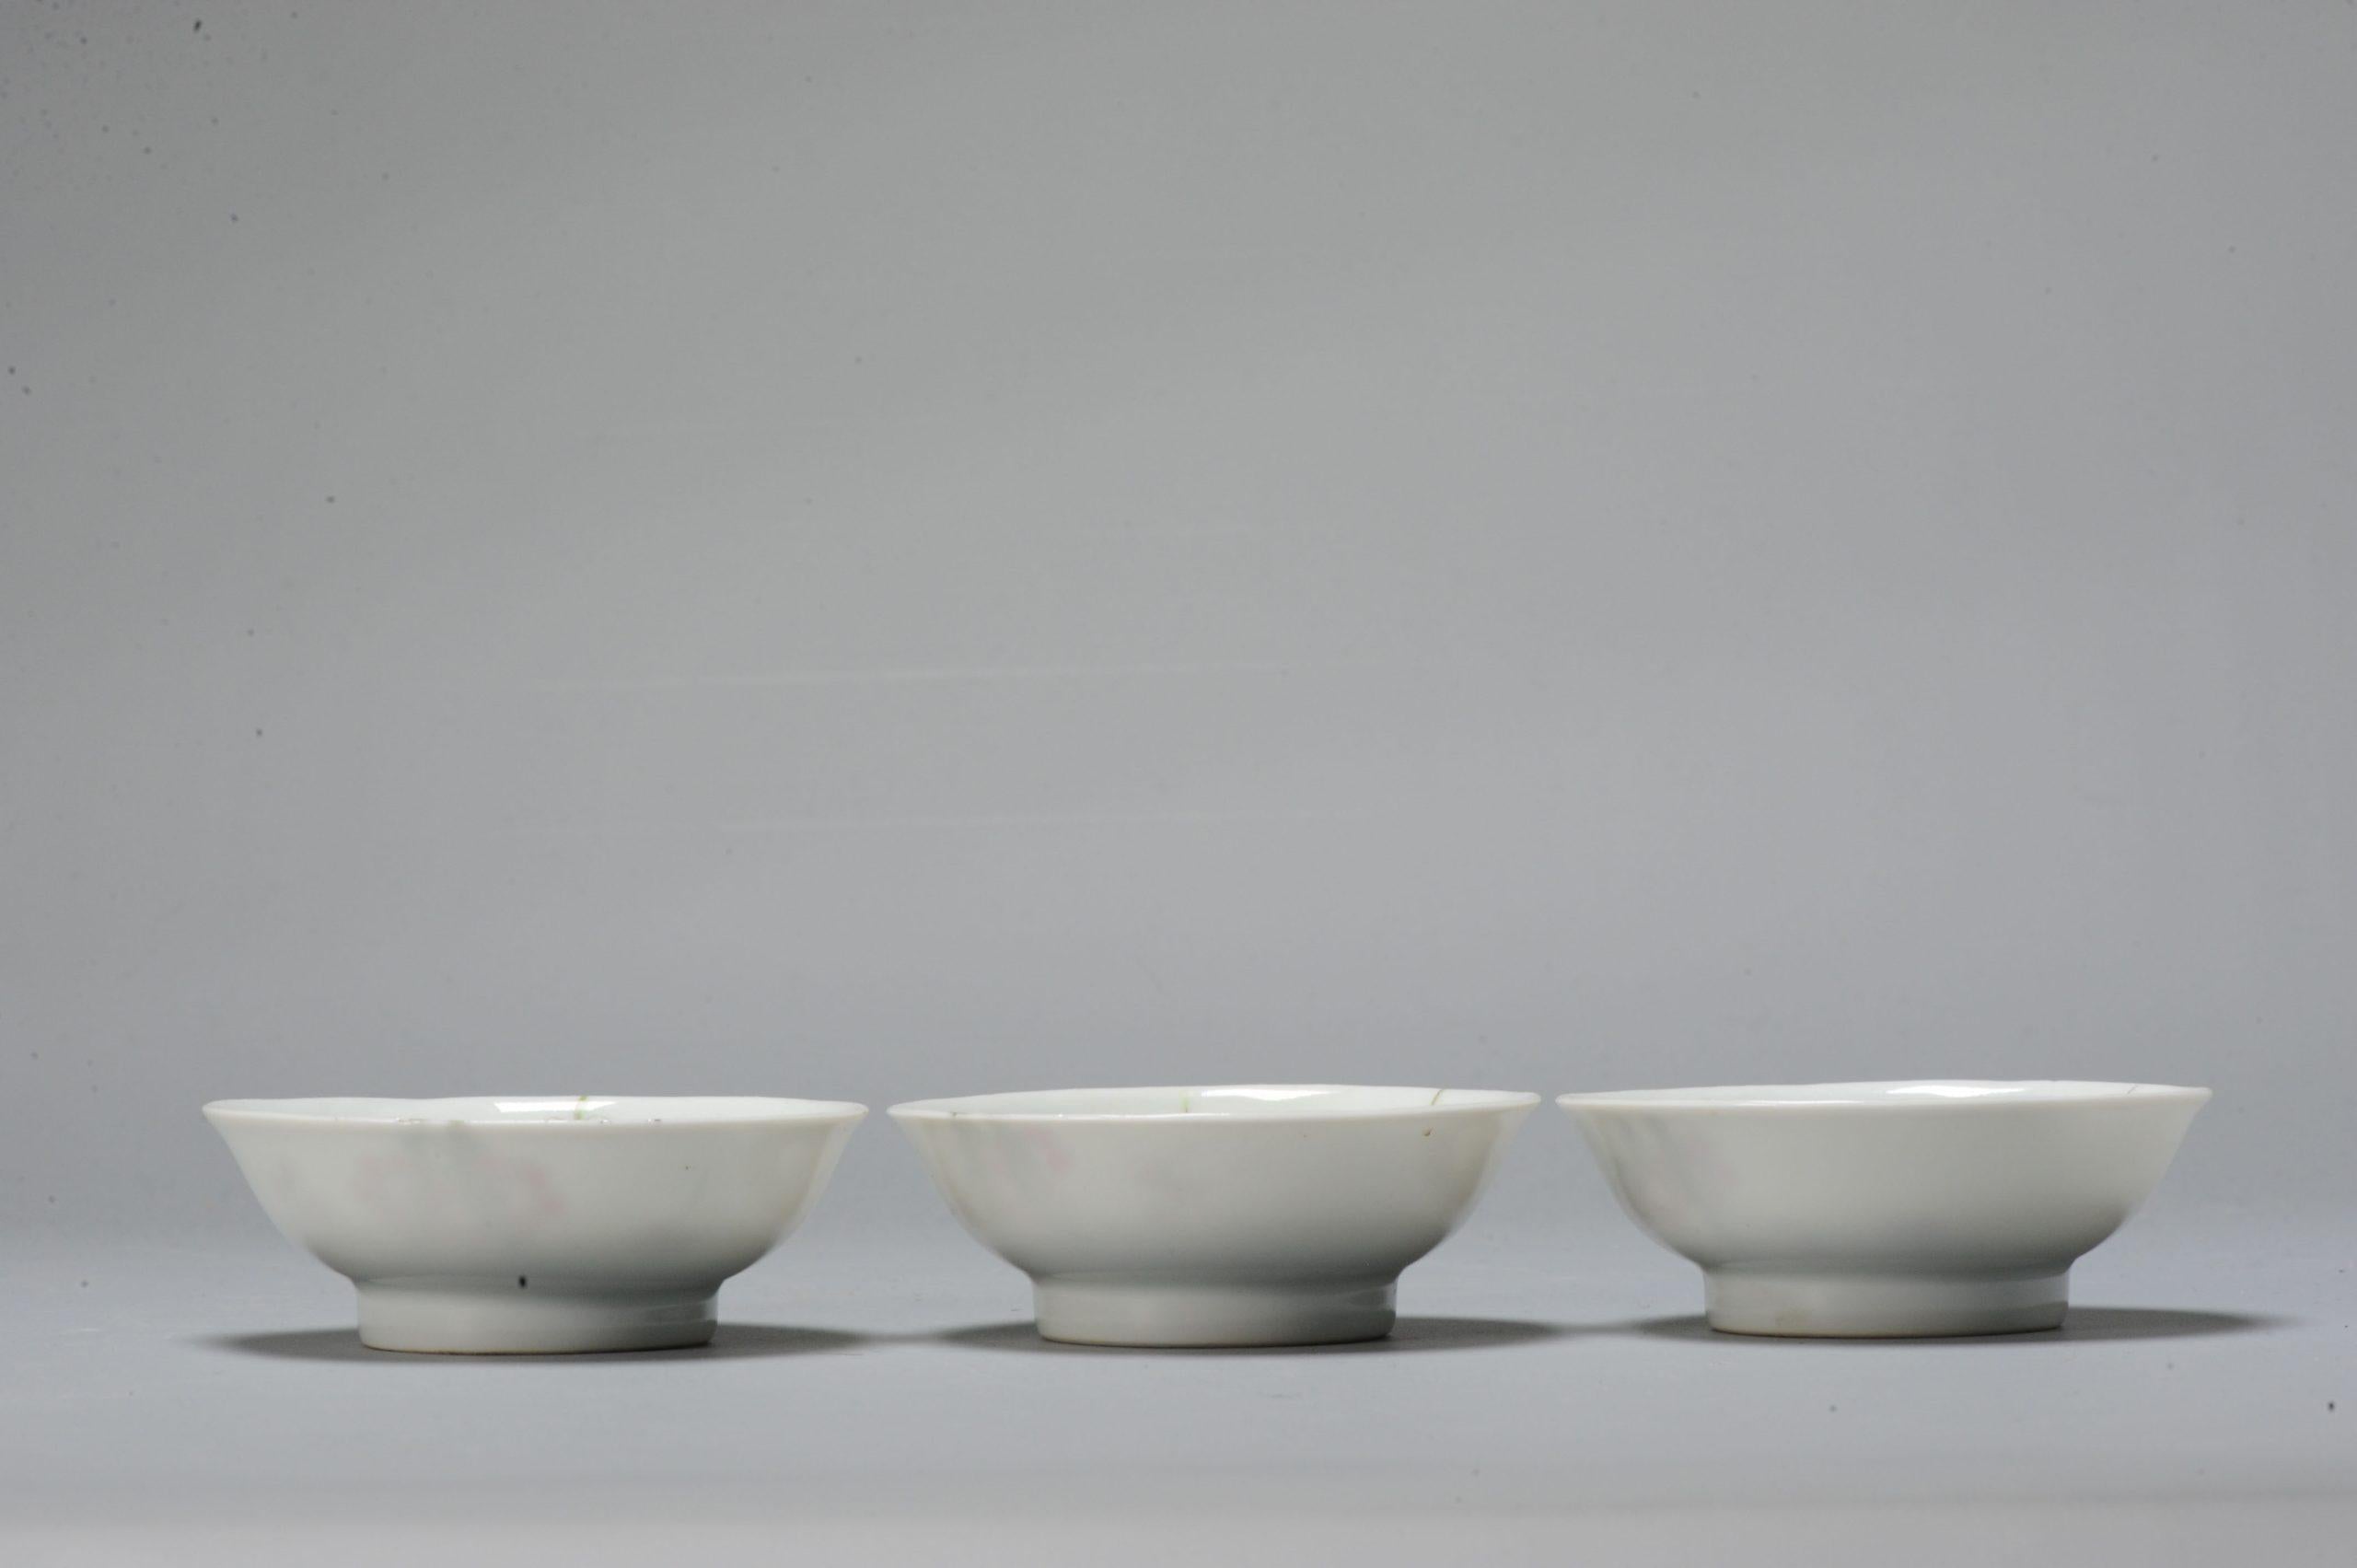 Faboulous japanese porcelain shallow bowls.

Stamp mark at the base.

Additional information:
Material: Porcelain & Pottery
Type: Bowls
Japanese Style: Other
Region of Origin: Japan
Period: 19th century, 20th century Meiji Periode (1867-1912), Showa